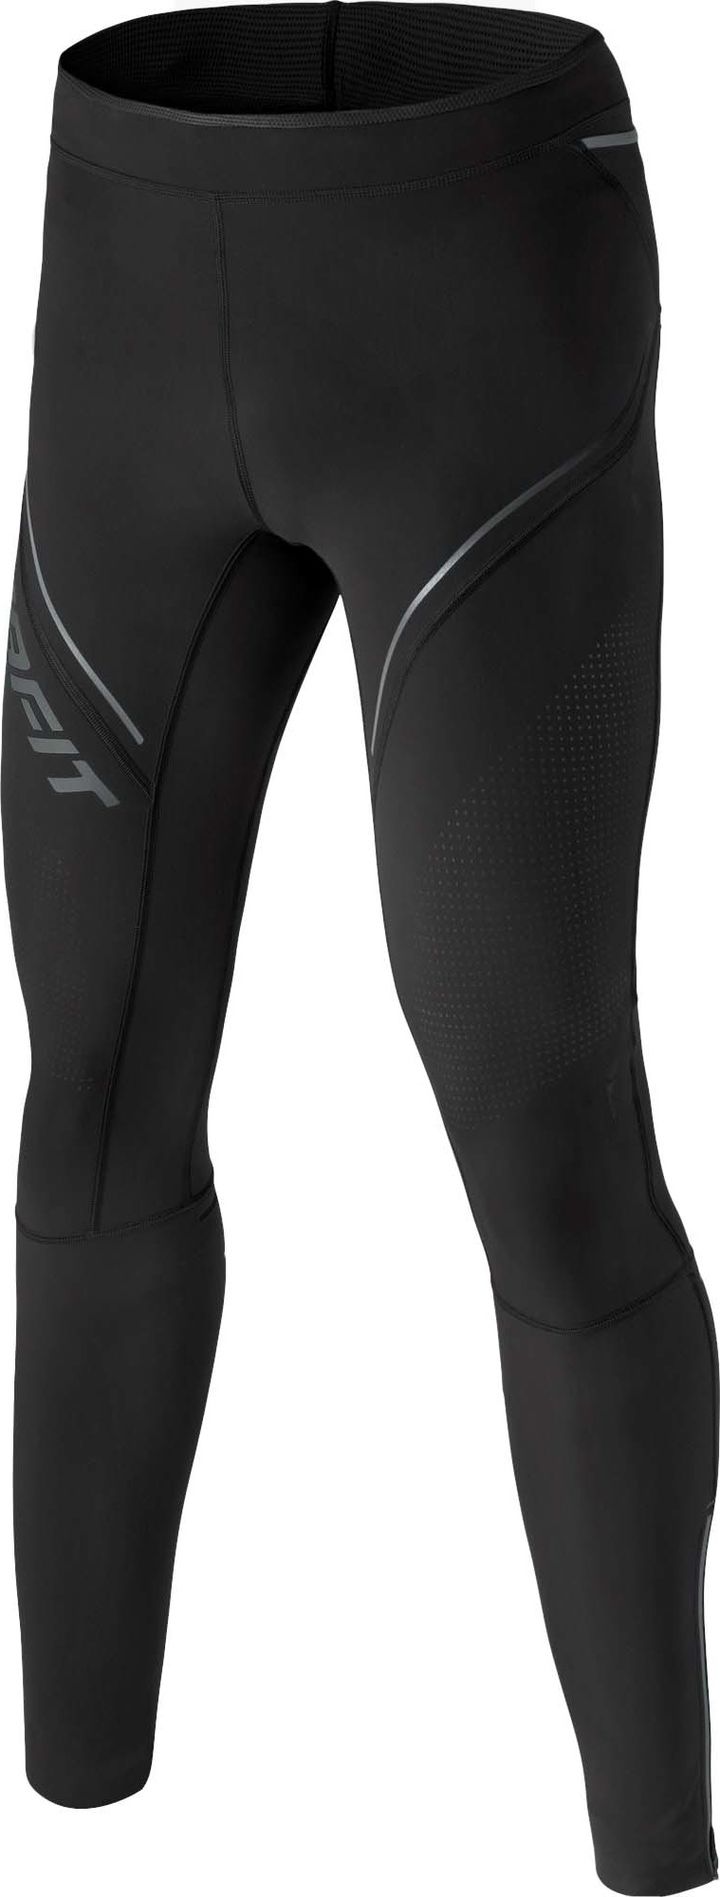 Men's Winter Running Tights black out Dynafit